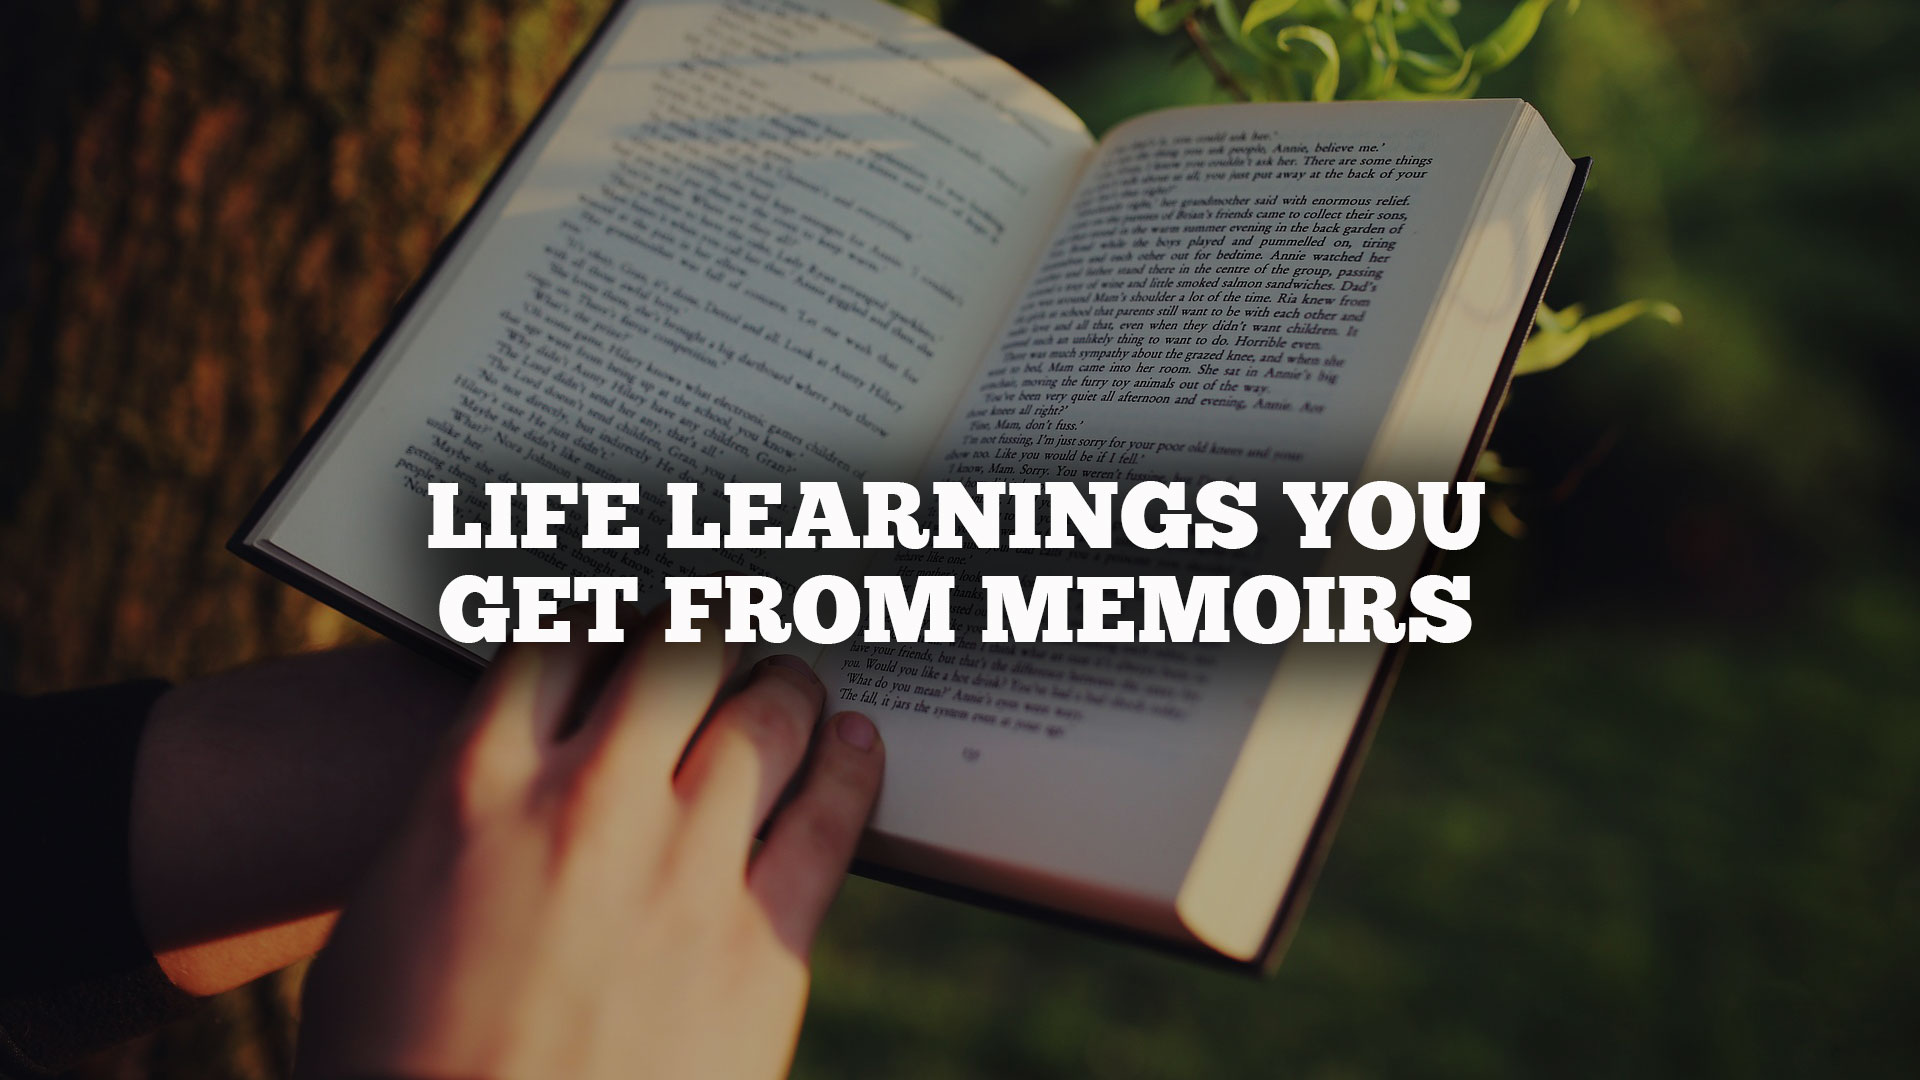 Life Learnings You Get From Memoirs